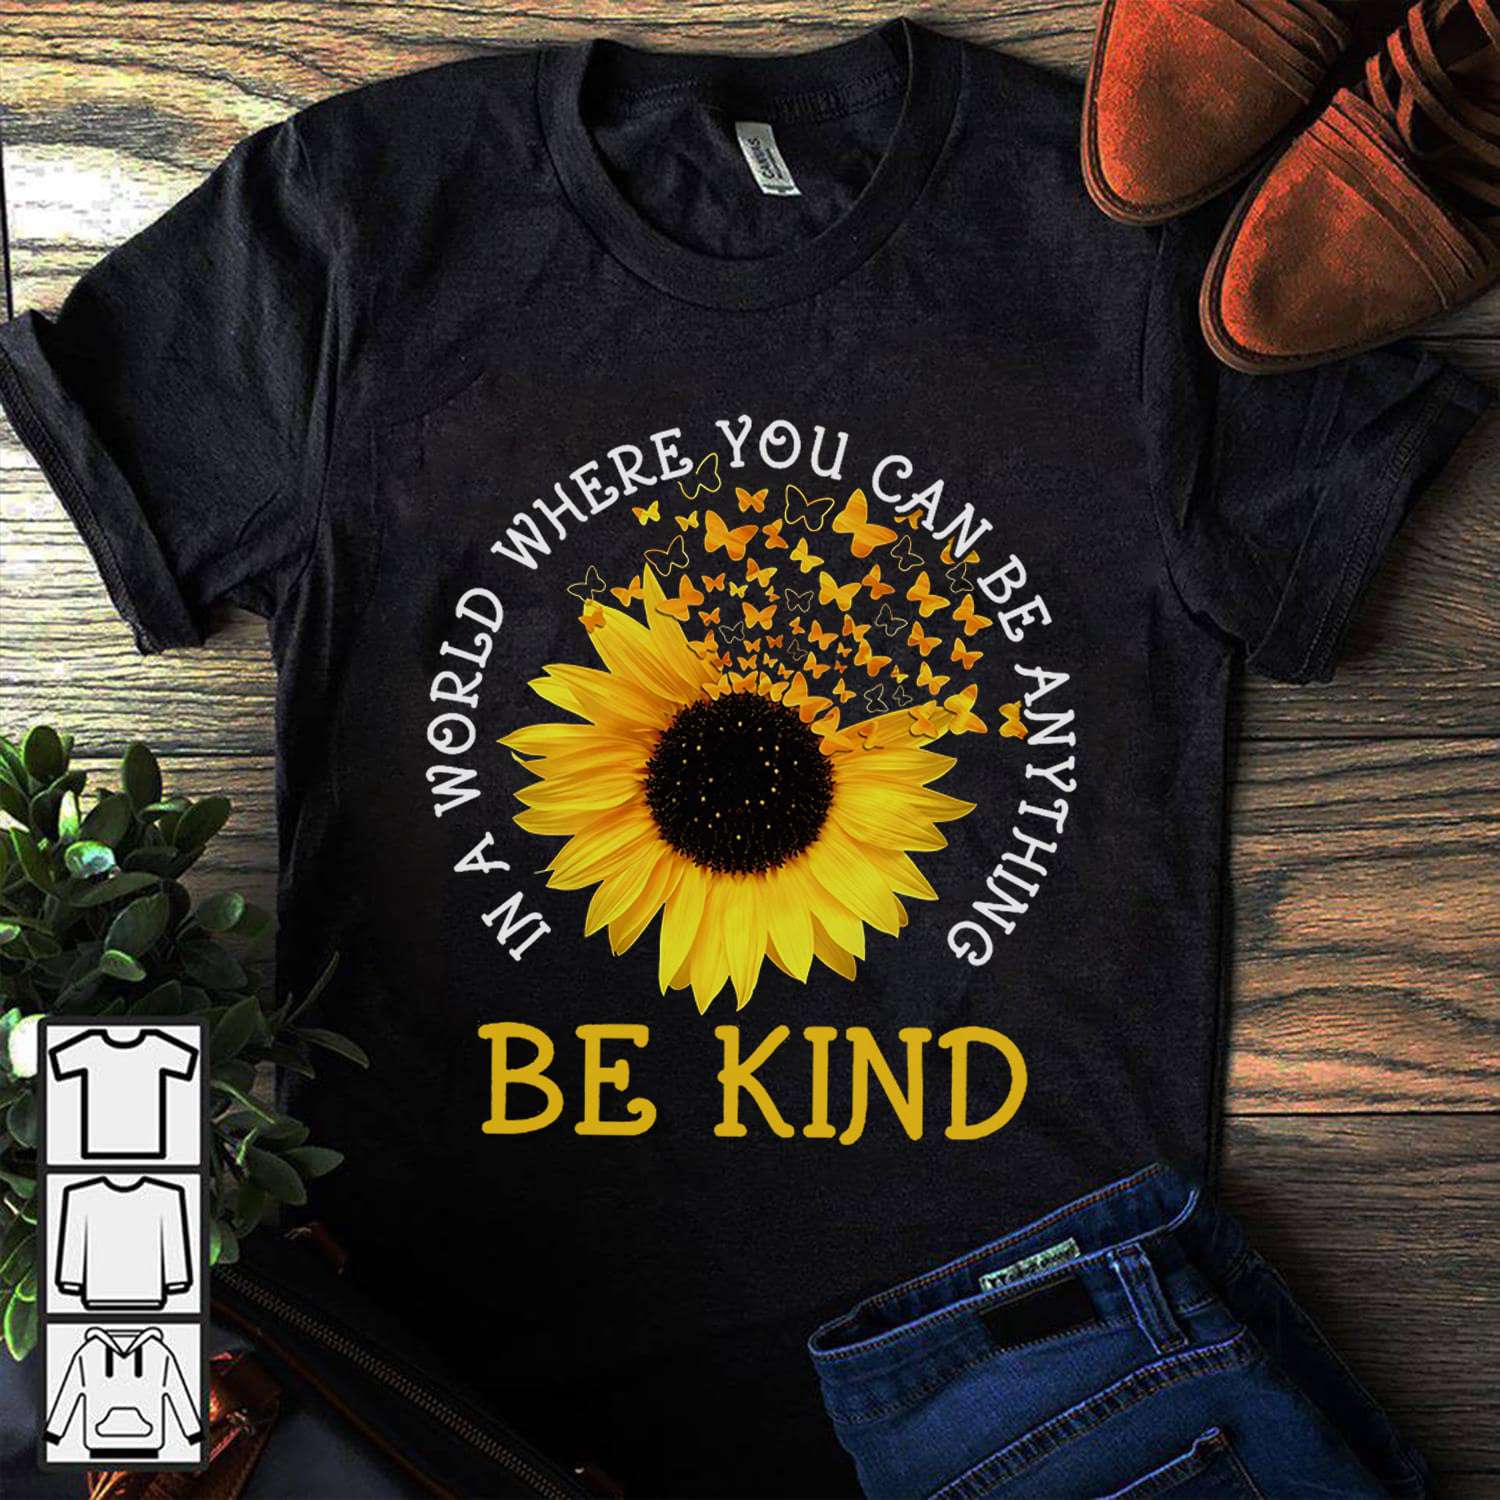 In a world where you can be anything - Be kind, butterflies and sunflower, love being kind